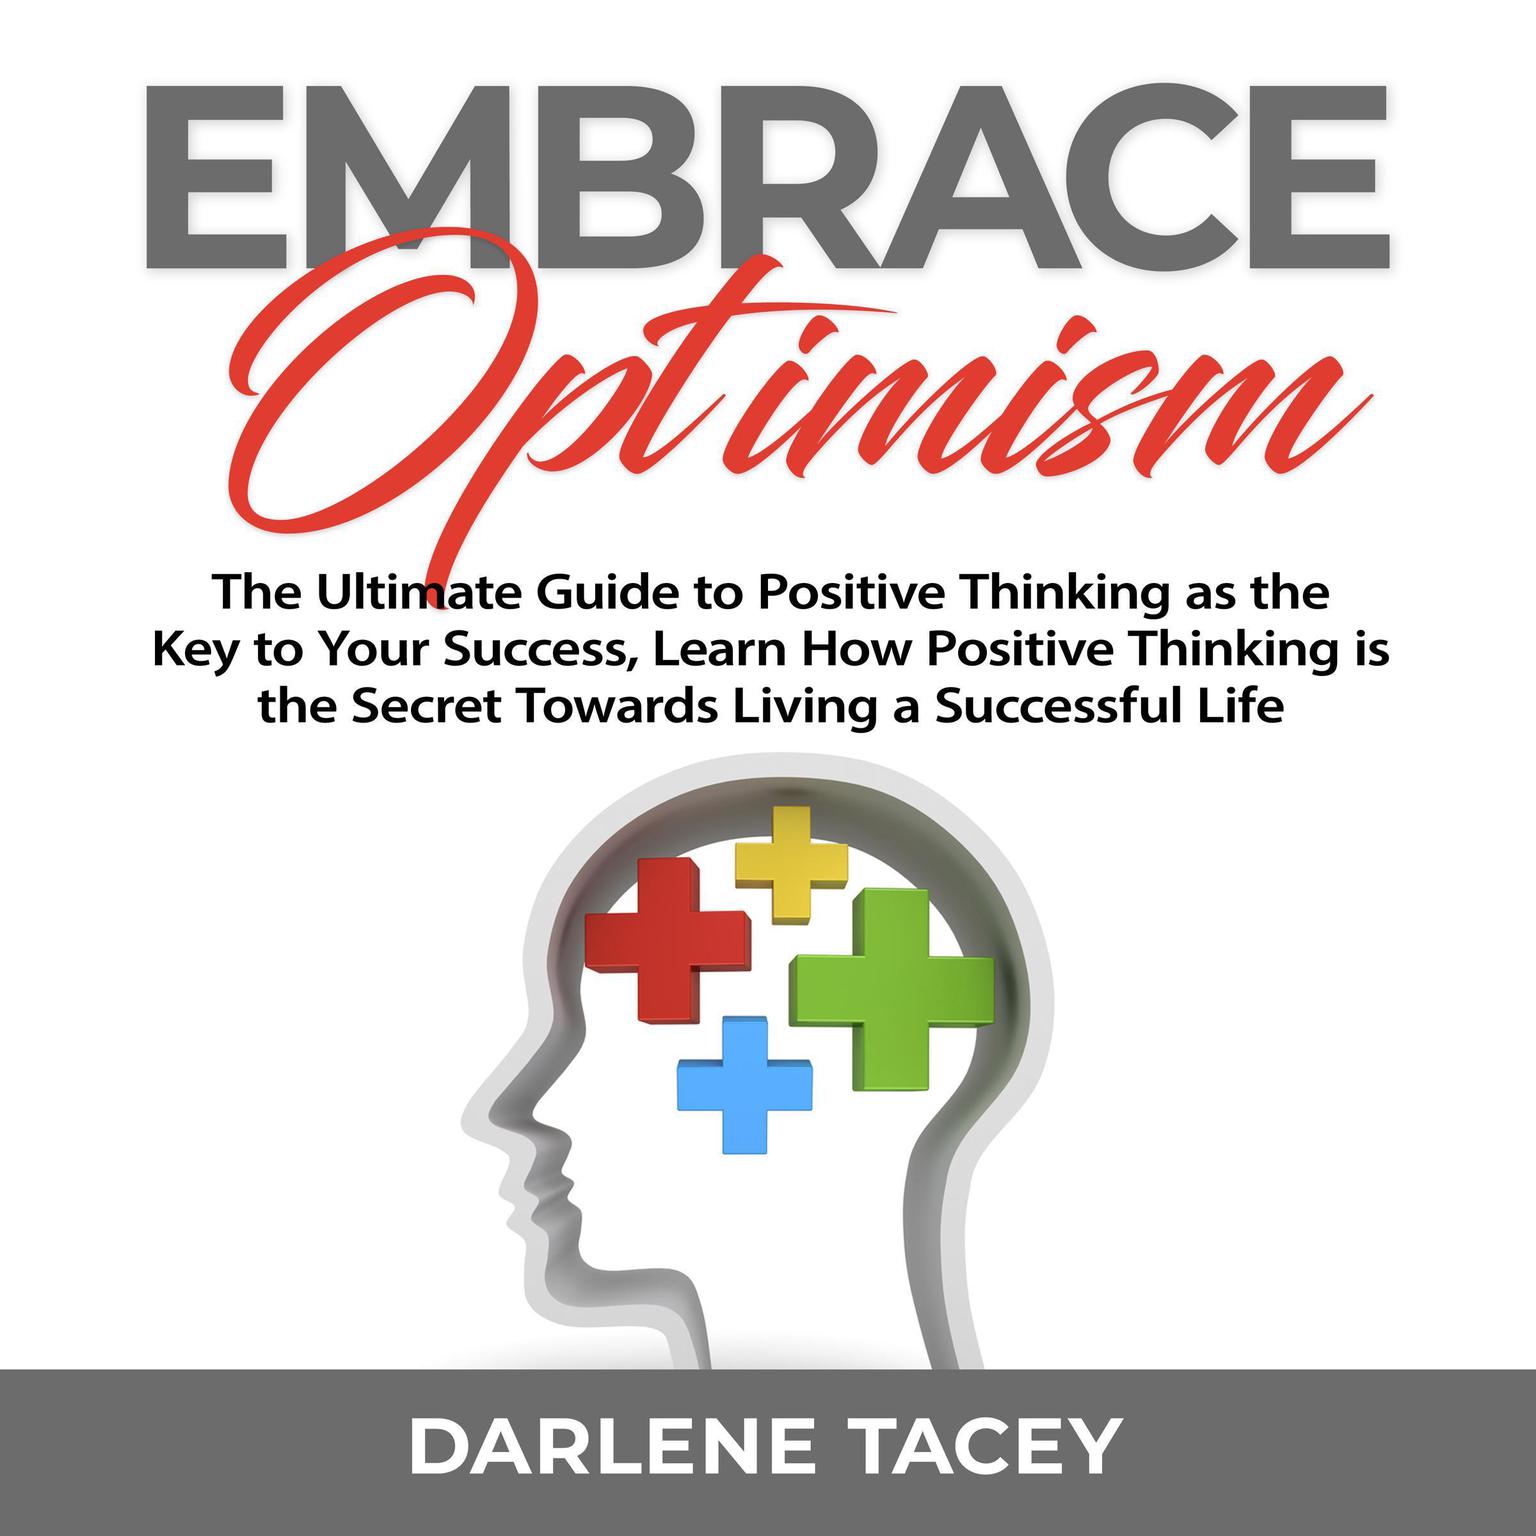 Embrace Optimism: The Ultimate Guide to Positive Thinking as the Key to Your Success, Learn How Positive Thinking is the Secret Towards Living a Successful Life Audiobook, by Darlene Tacey